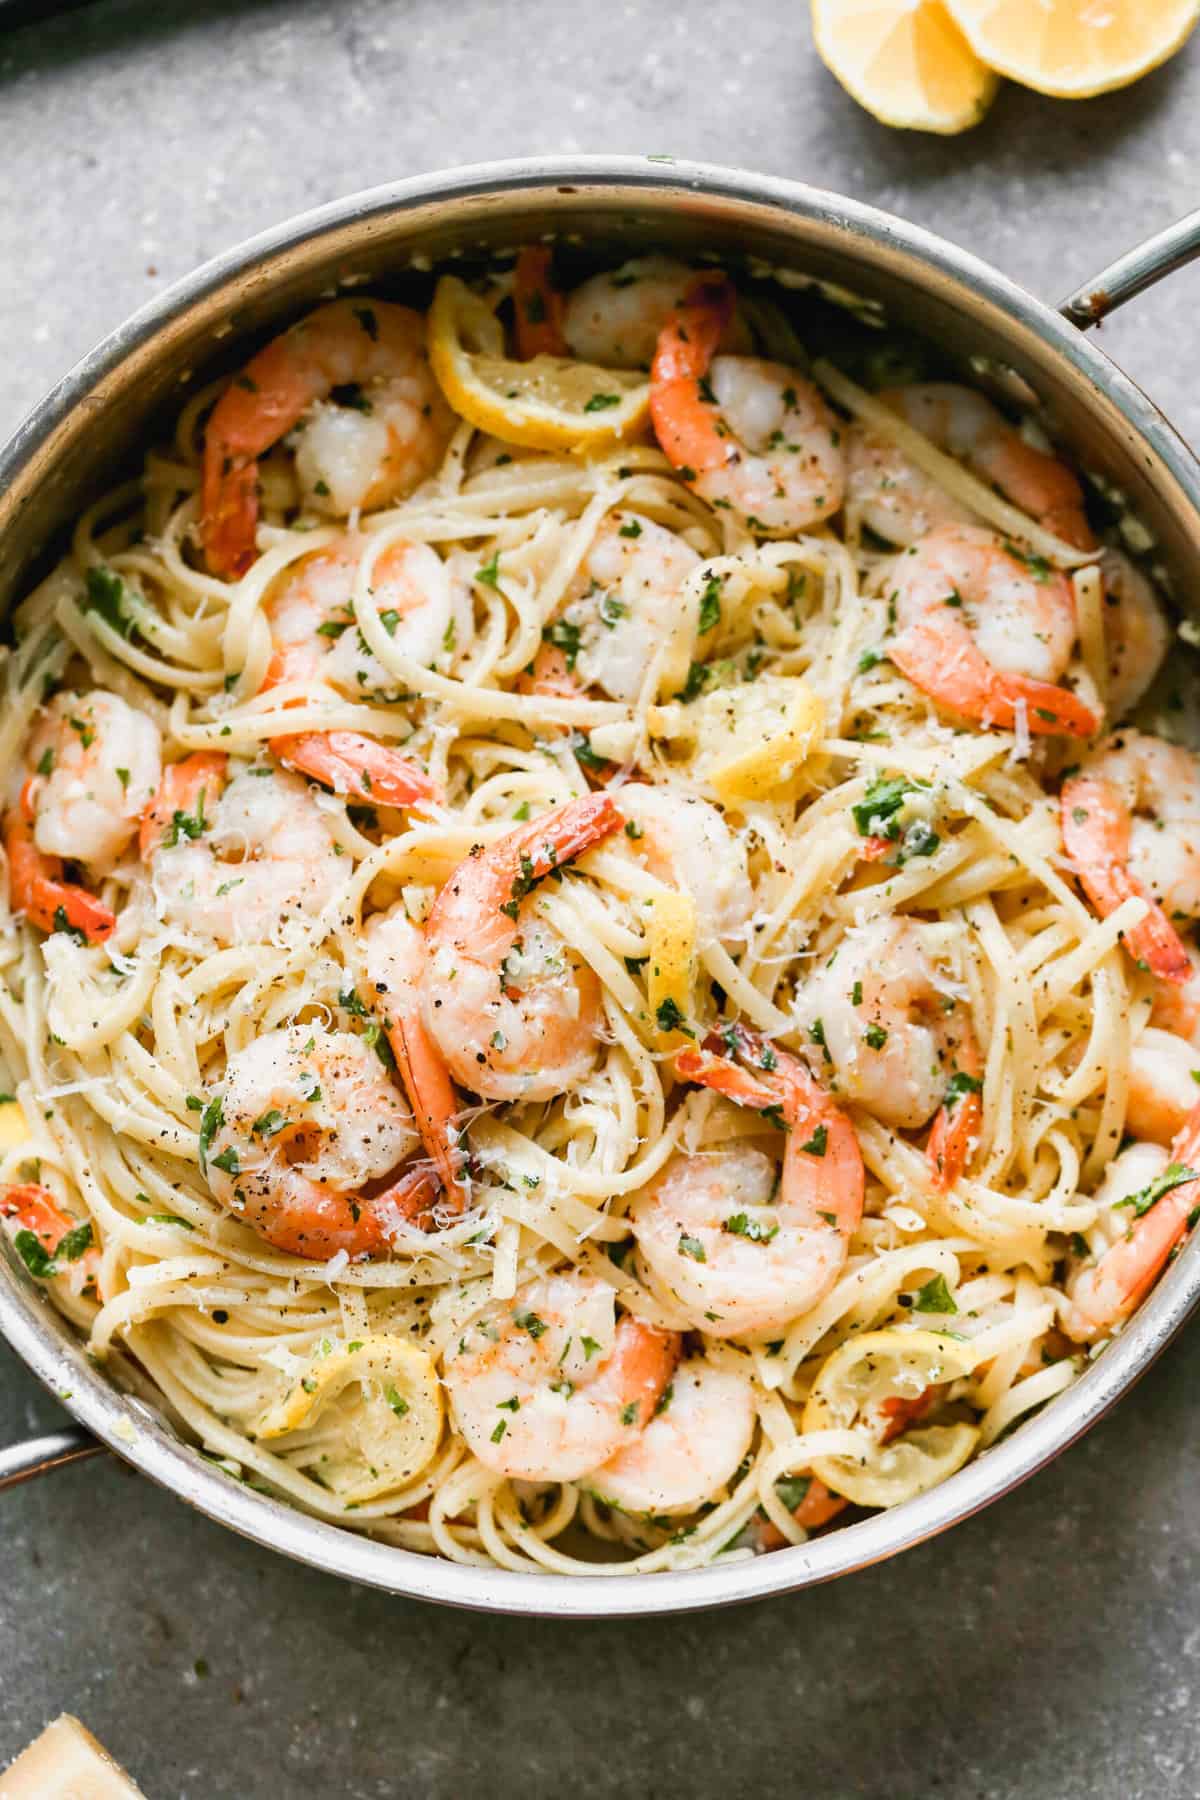 A pan filled with Shrimp Linguine in a garlic lemon sauce and parmesan cheese.